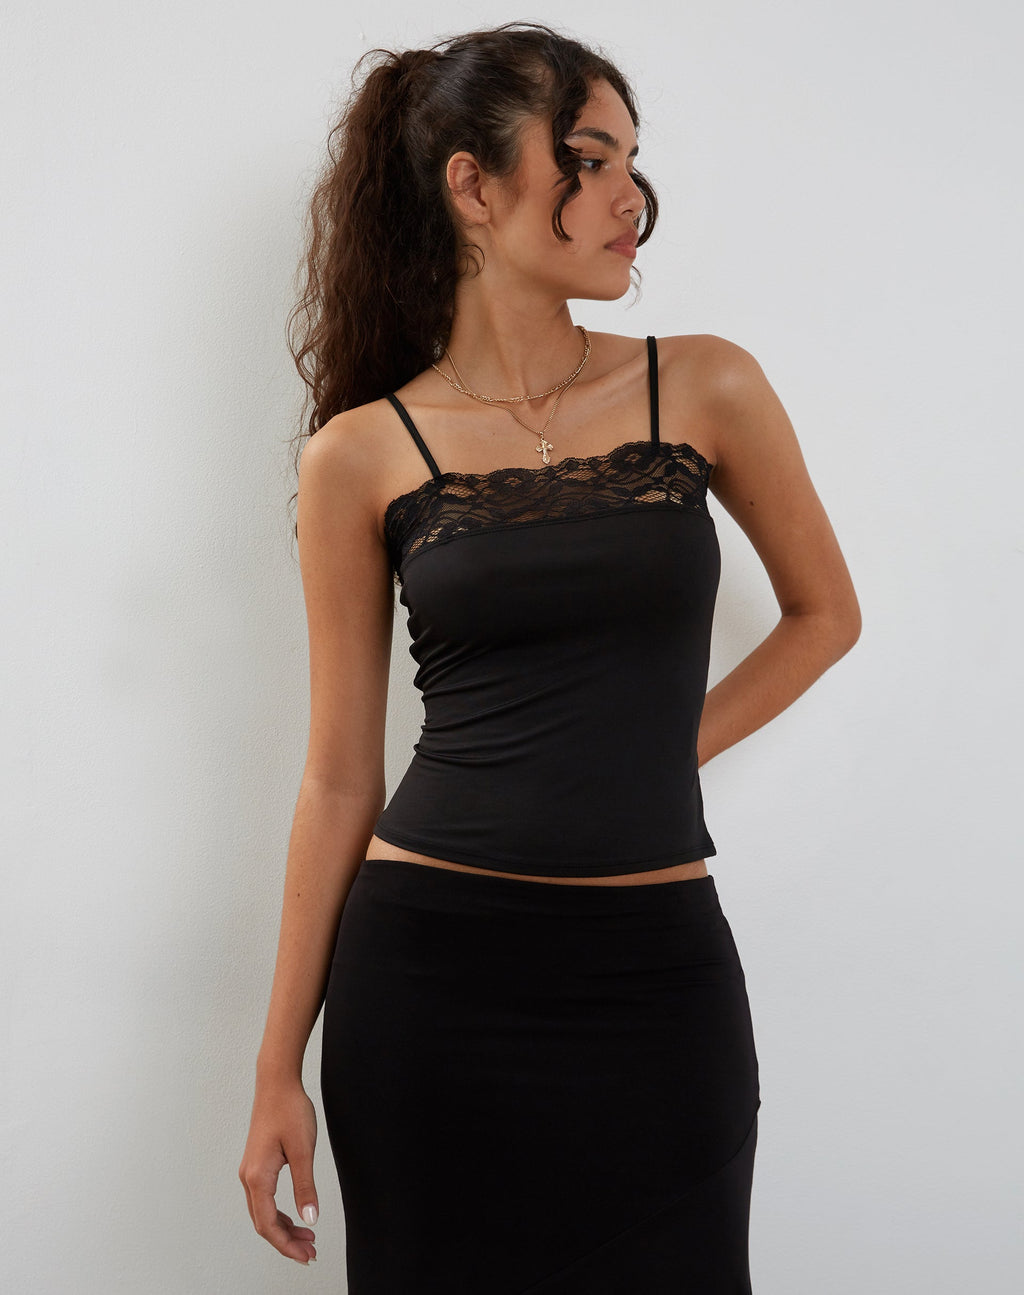 Tucci Vest Top in Slinky Lace Black